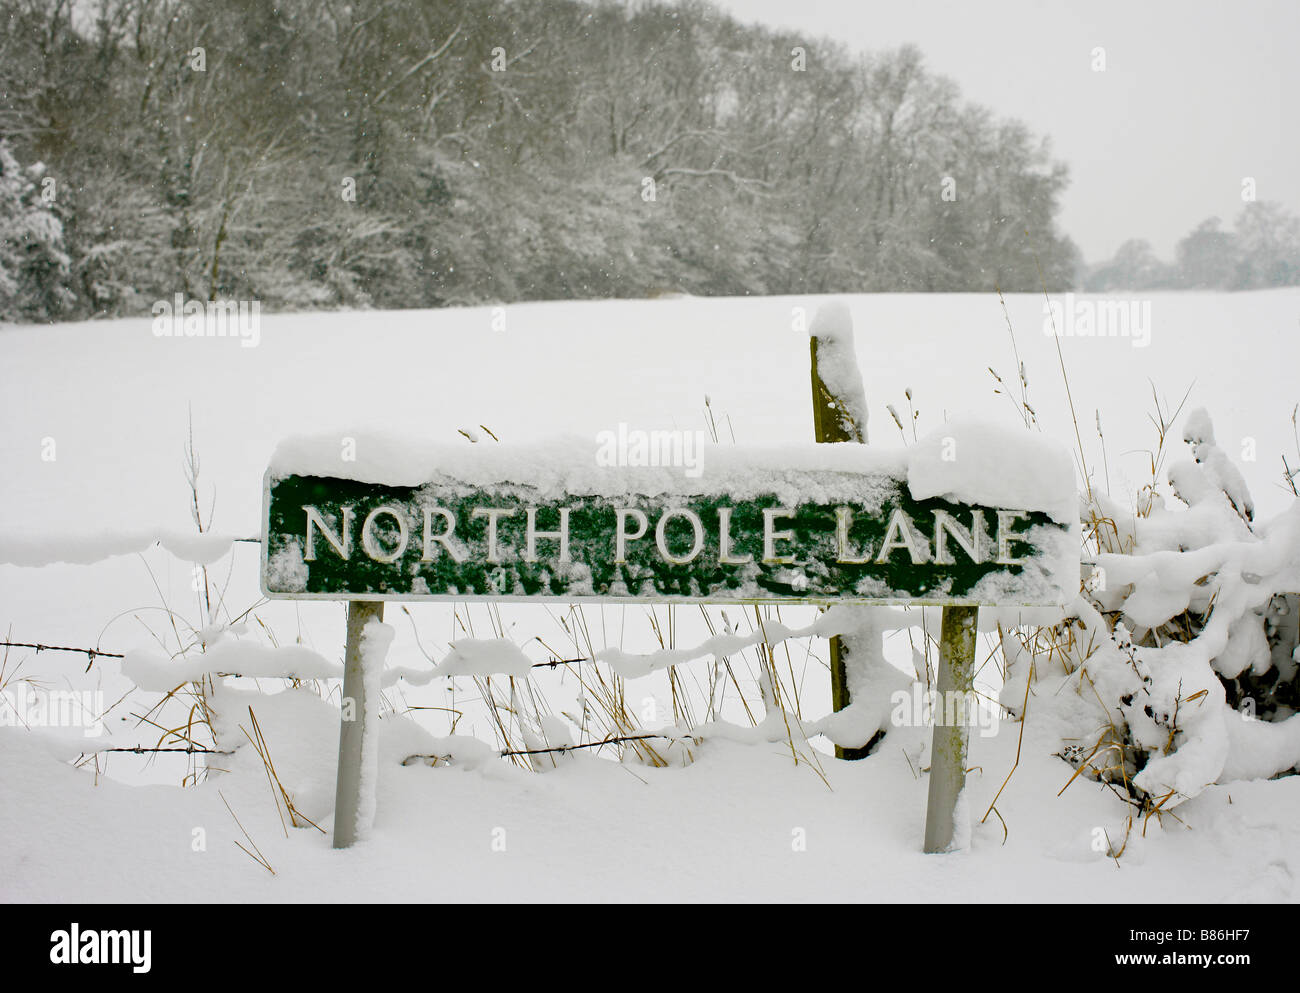 A snow covered road sign 'North Pole Lane' in Keston, Greater London, after the heaviest snowfall in 18 years. Stock Photo